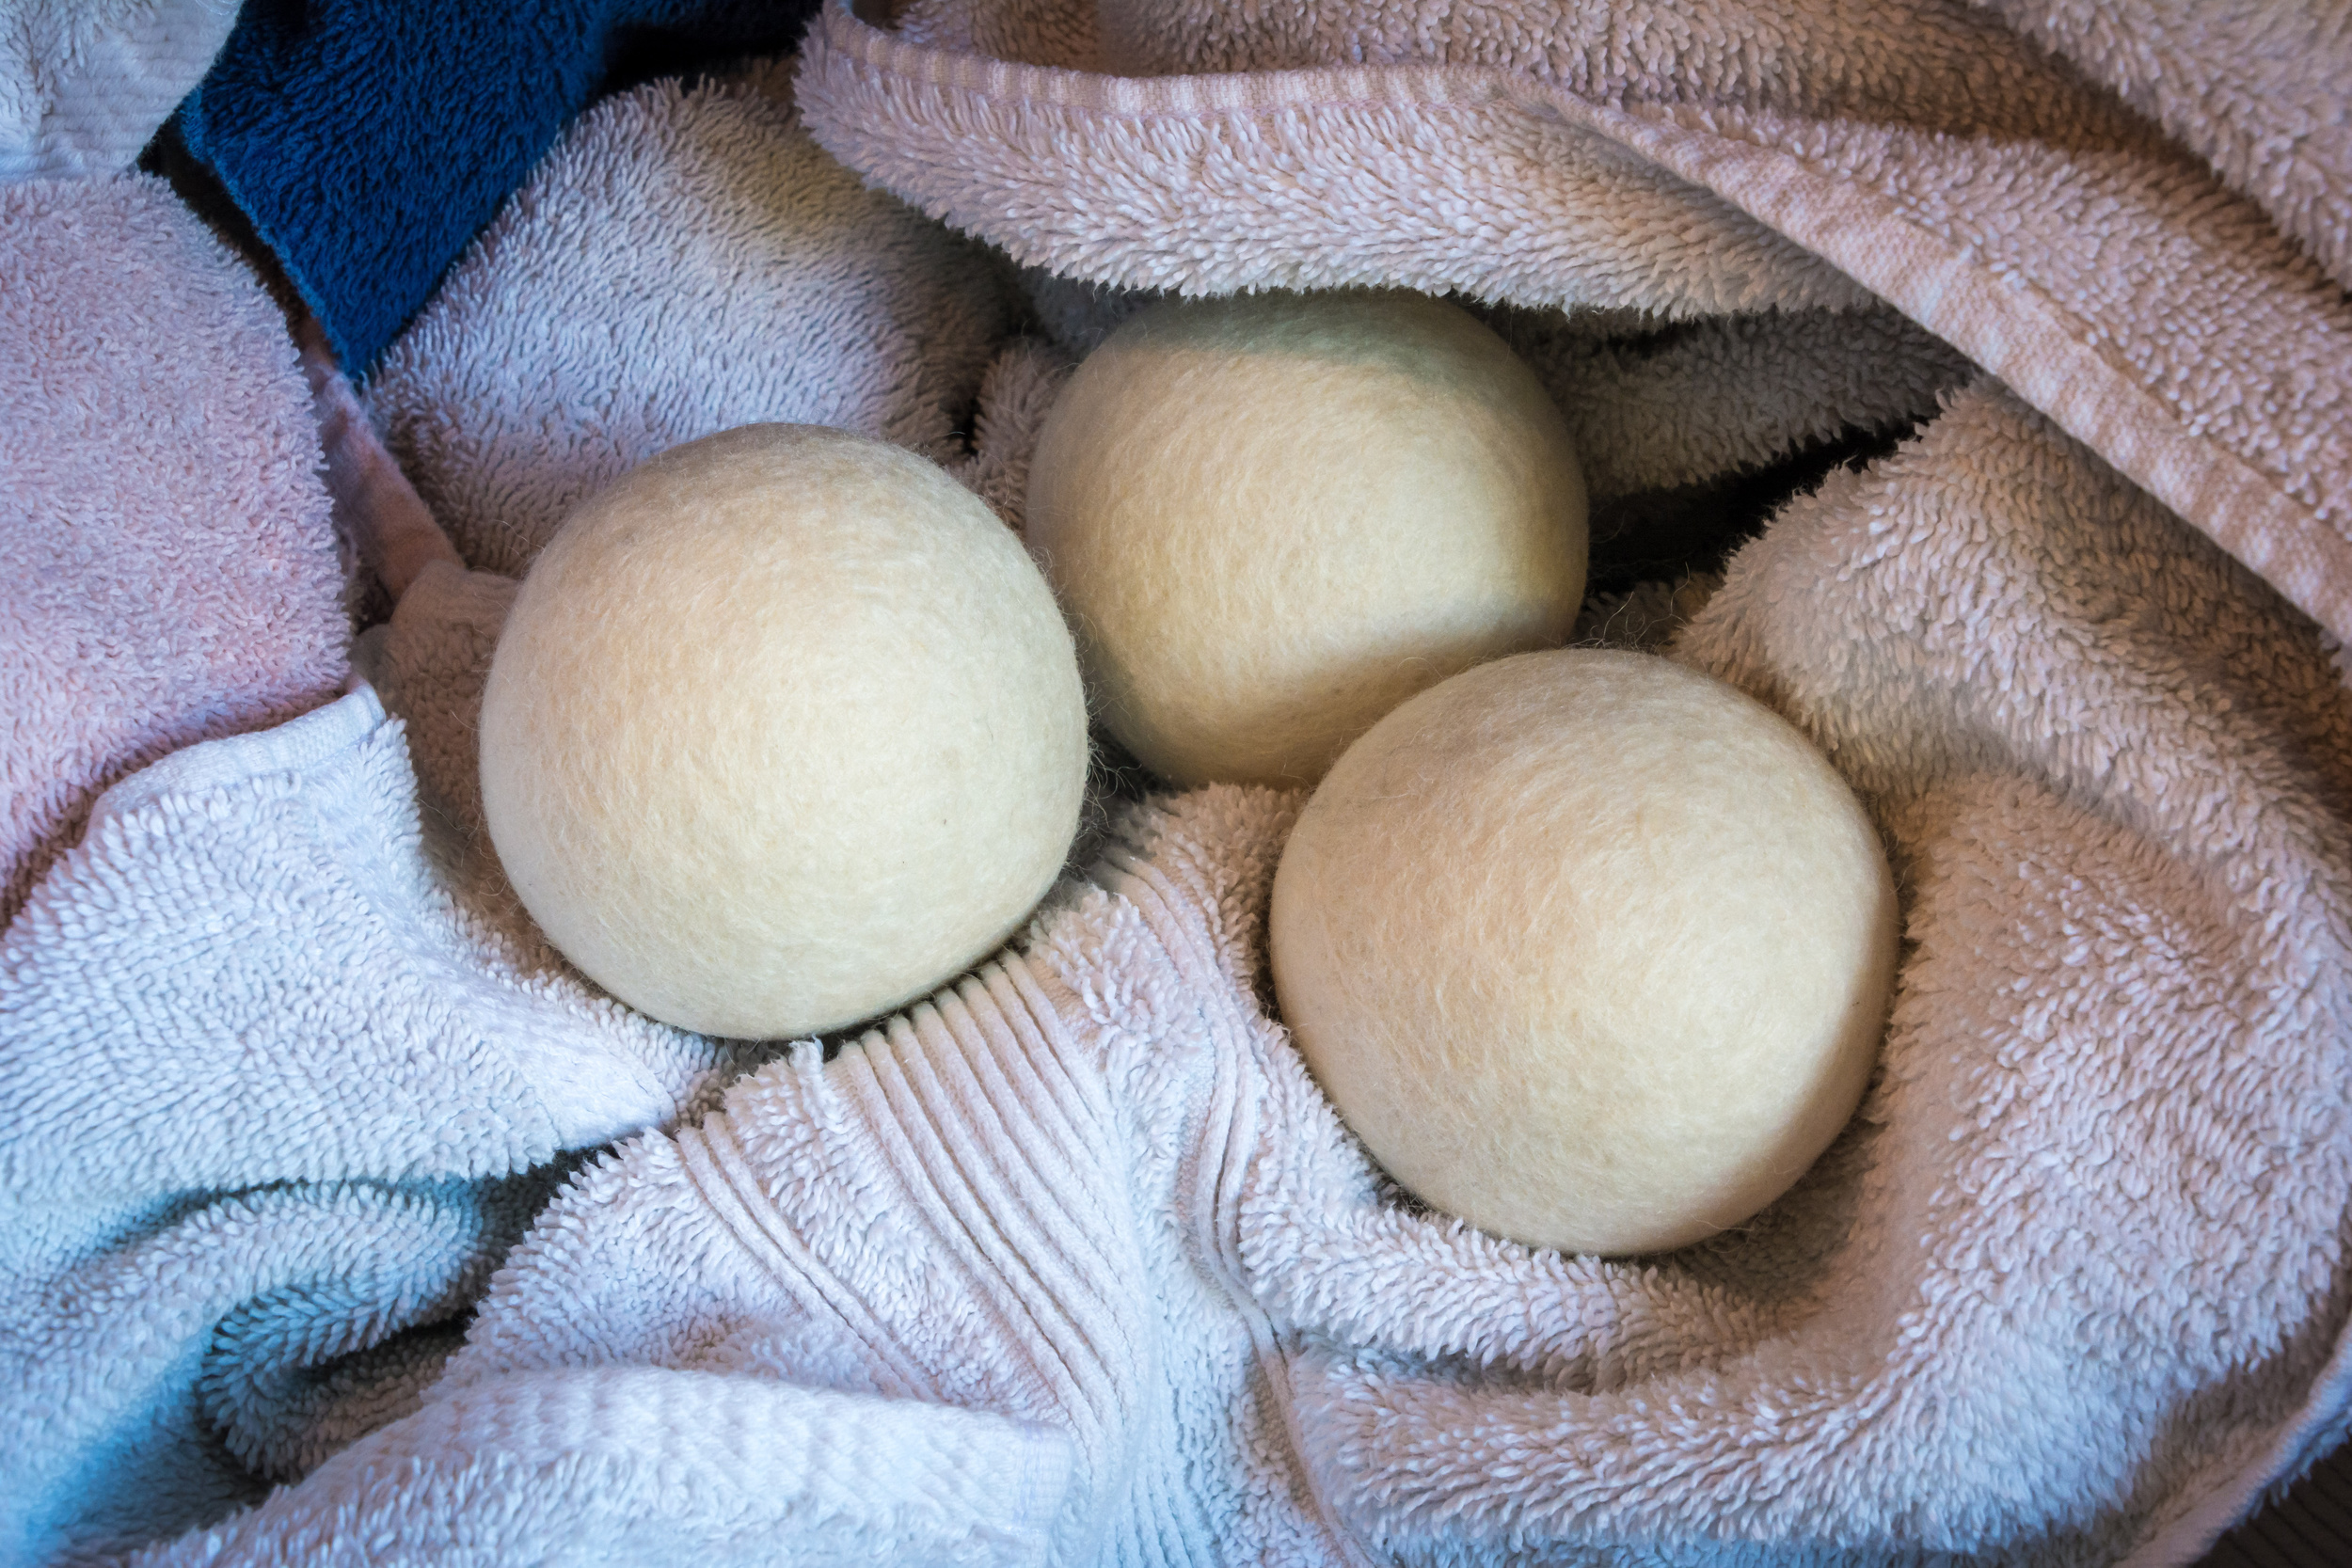 <p>Dryer sheets may help reduce static and make laundry smell nice, but they're packed with chemicals that can be toxic to environments once you've tossed them in the trash. Reusable wool dryer balls, on the other hand, are much more eco-friendly and can be scented with a few drops of essential oils if desired. </p>